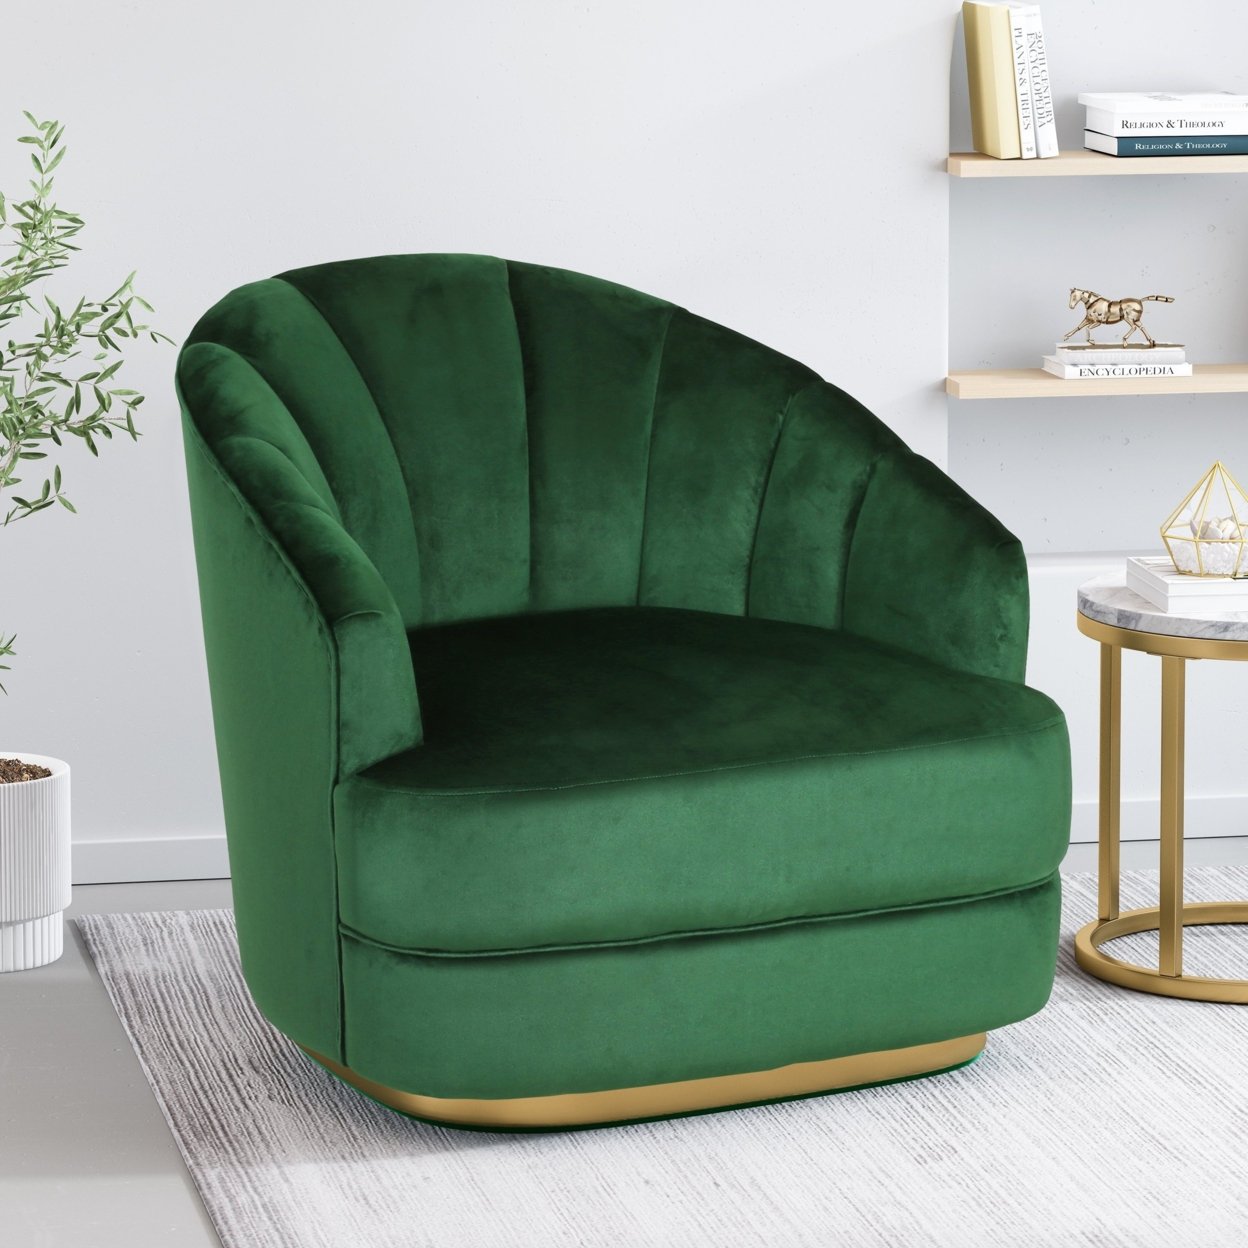 Caily Modern Glam Channel Stitch Velvet Club Chair - Copper/emerald